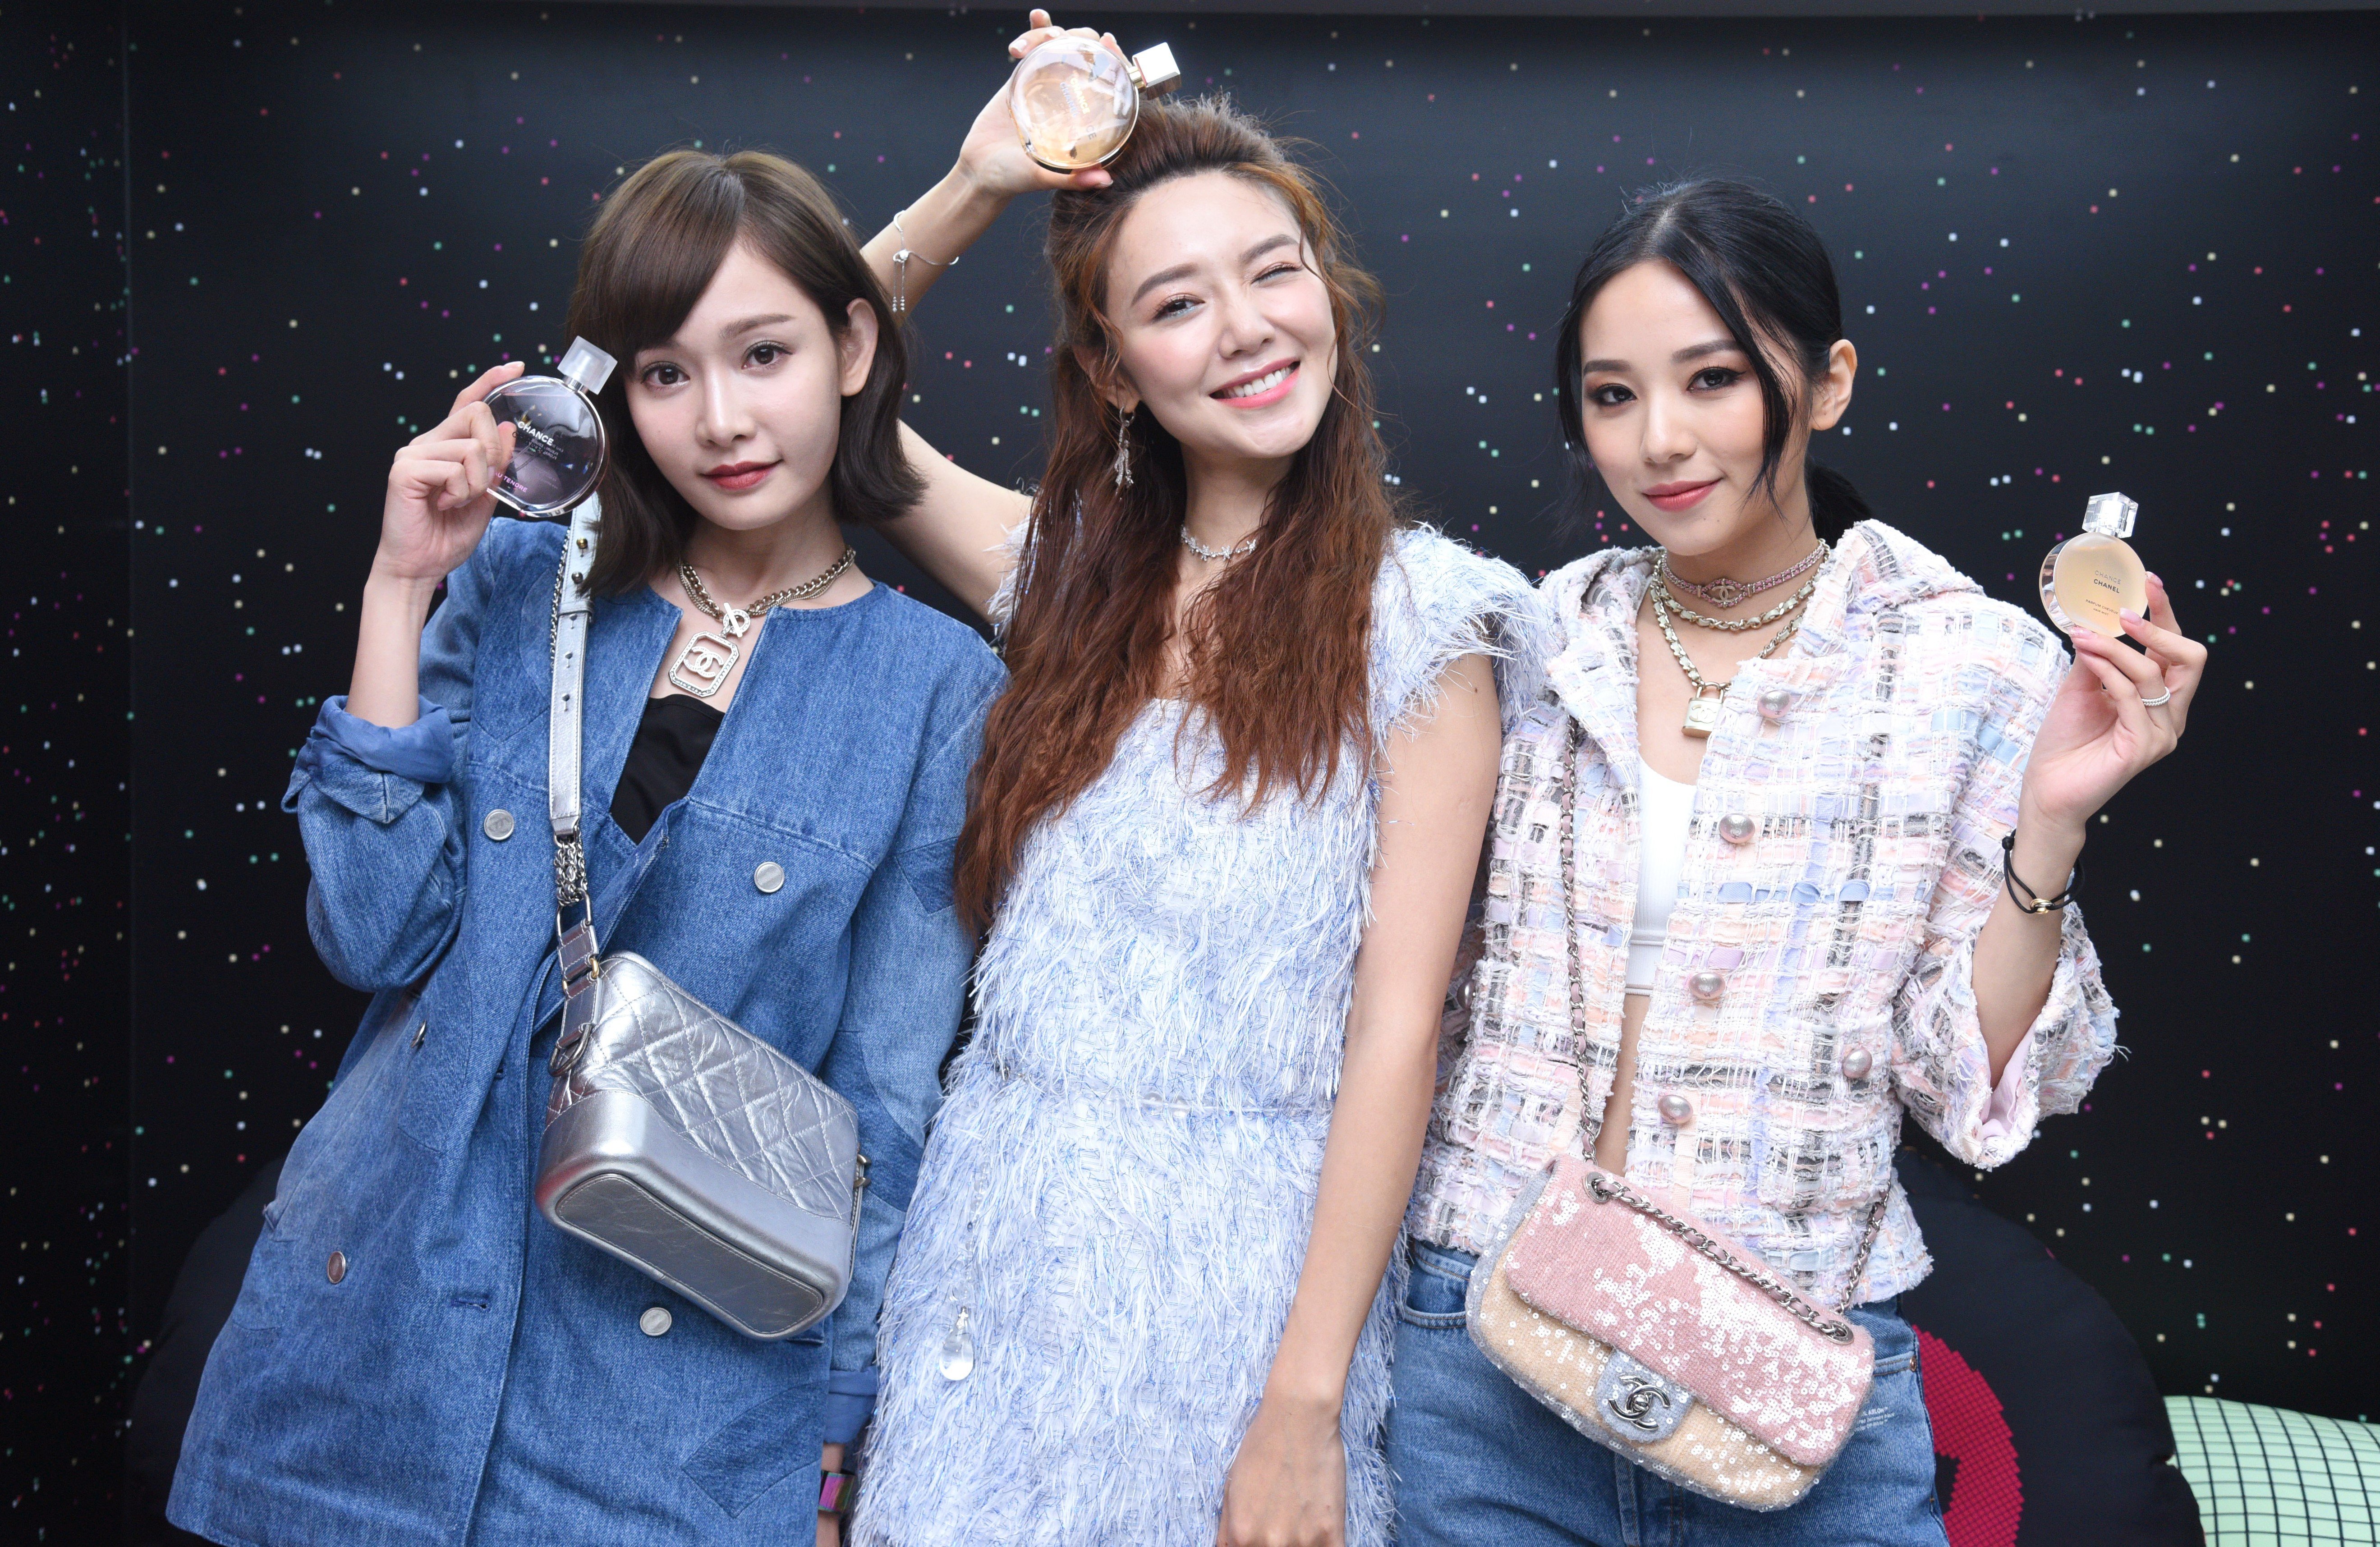 Singer Aka Chio, actress Elva Ni and artist Heidi Lee at Chanel's Coco Game Center. The brand’s pop-ups in major Asian cities were designed to appeal to financially independent young millennials.